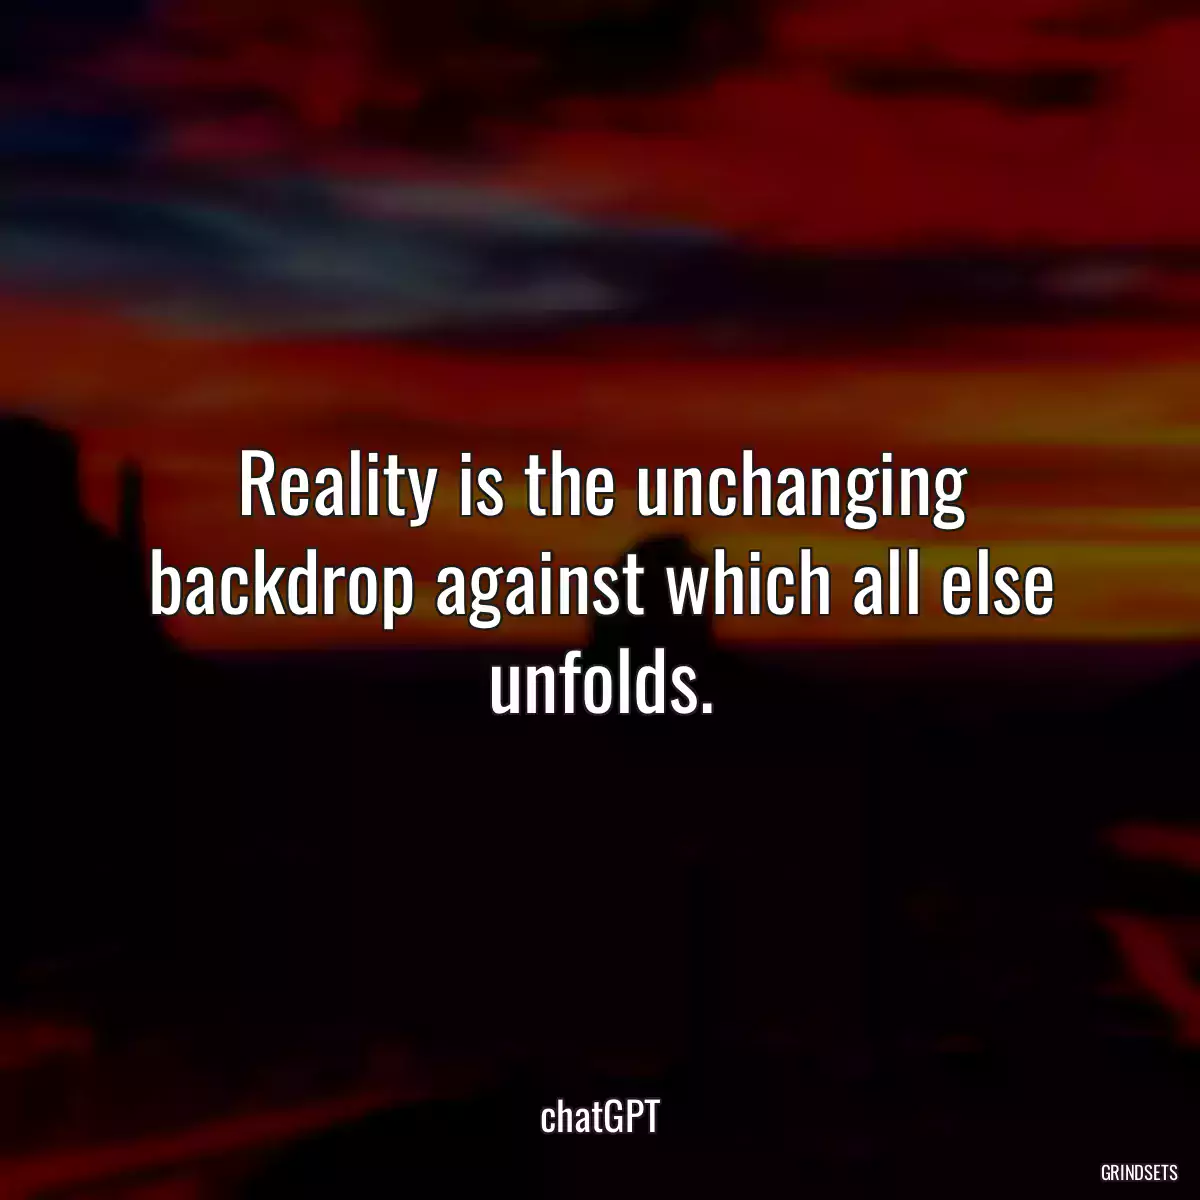 Reality is the unchanging backdrop against which all else unfolds.